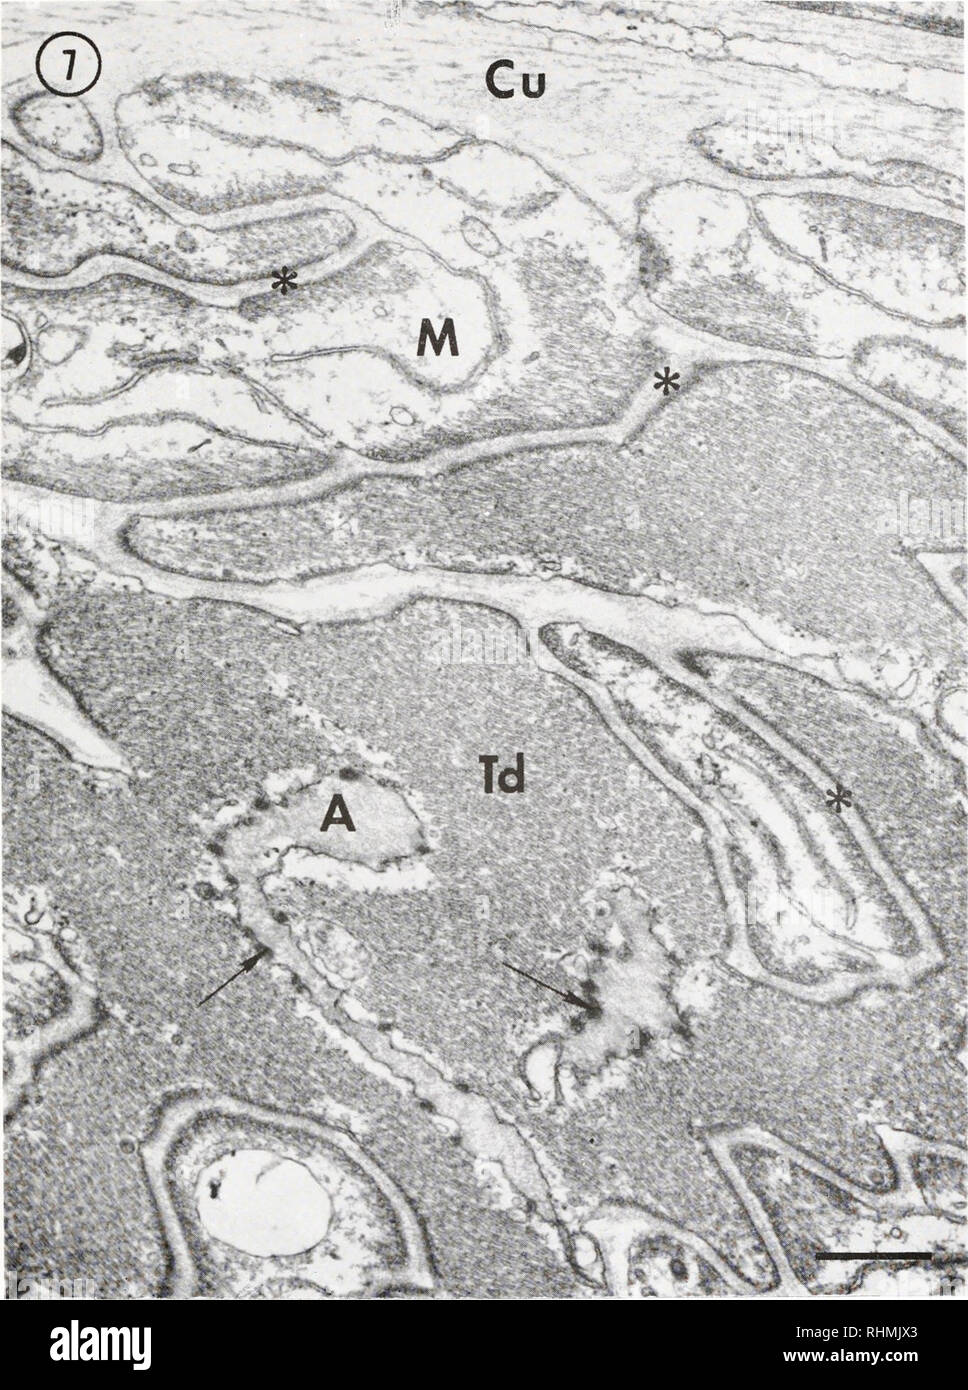 . The Biological bulletin. Biology; Zoology; Biology; Marine Biology. FIGURE 7. Both muscle-tendinal cell and tendinal cell-apodeme attachment sites are shown. The desmosomal-like muscle-tendinal junction (asterisks) shows a very extensive degree of interdigitation between muscle (M) and tendinal-cell (Td). The tendinal cell-apodeme (A) junction is hemidesmosomal (arrows) in nature. Here, dense material lines only the inner surface of the tendinal cell membrane. The attachment is formed along invaginations of the tendinal cell by &quot;tongue-like&quot; extensions of apodeme; Cu, cuticle. Cali Stock Photo